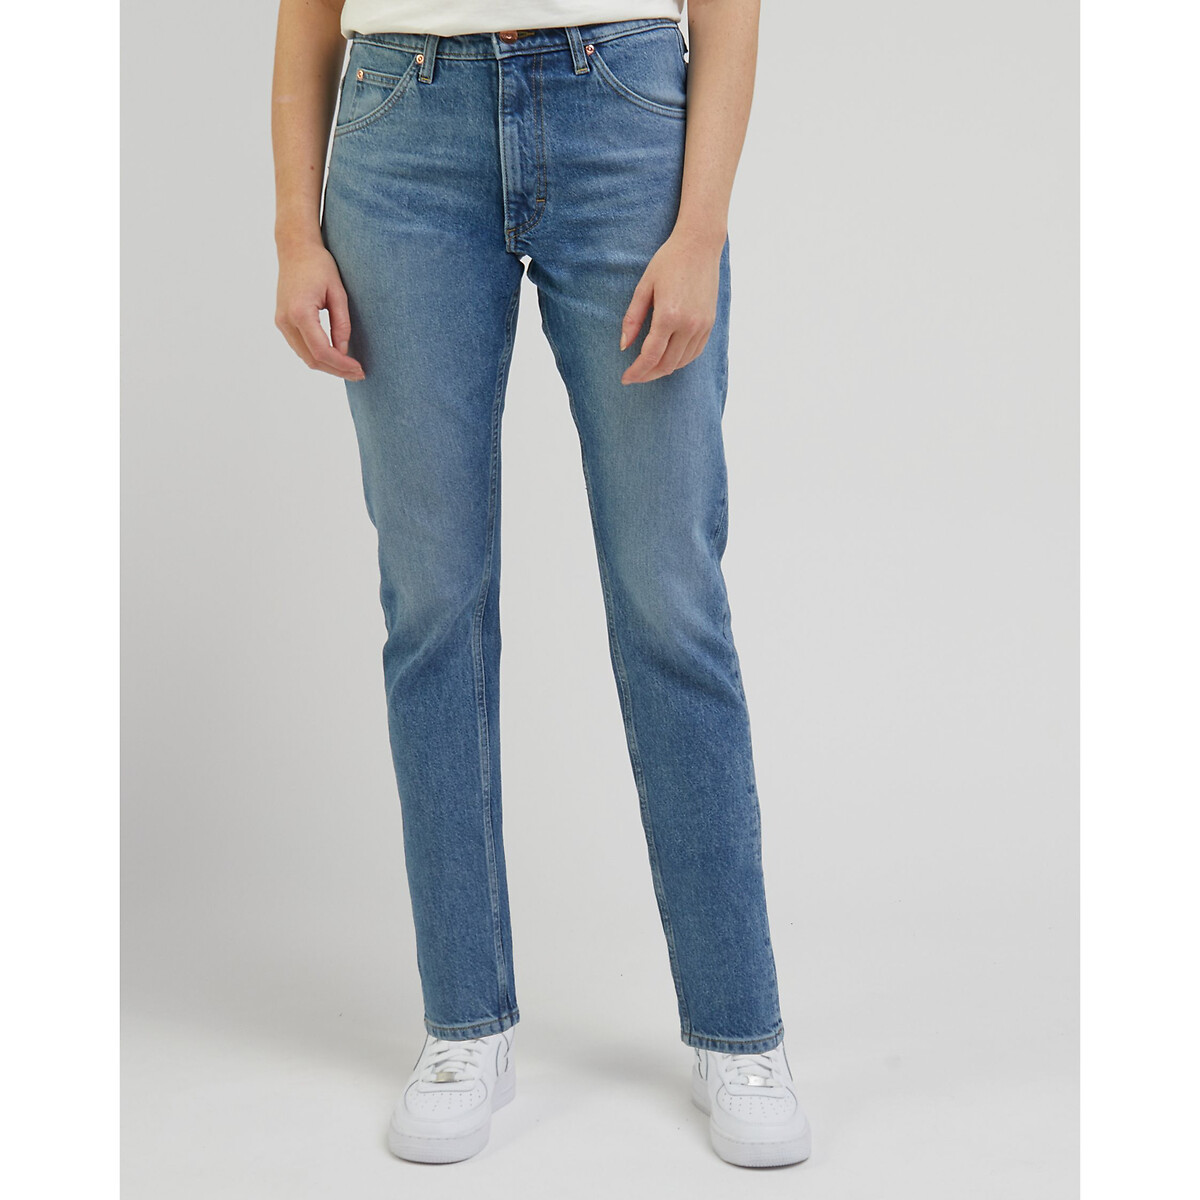 Image of Slim Fit Jeans in Mid Rise, Length 32"